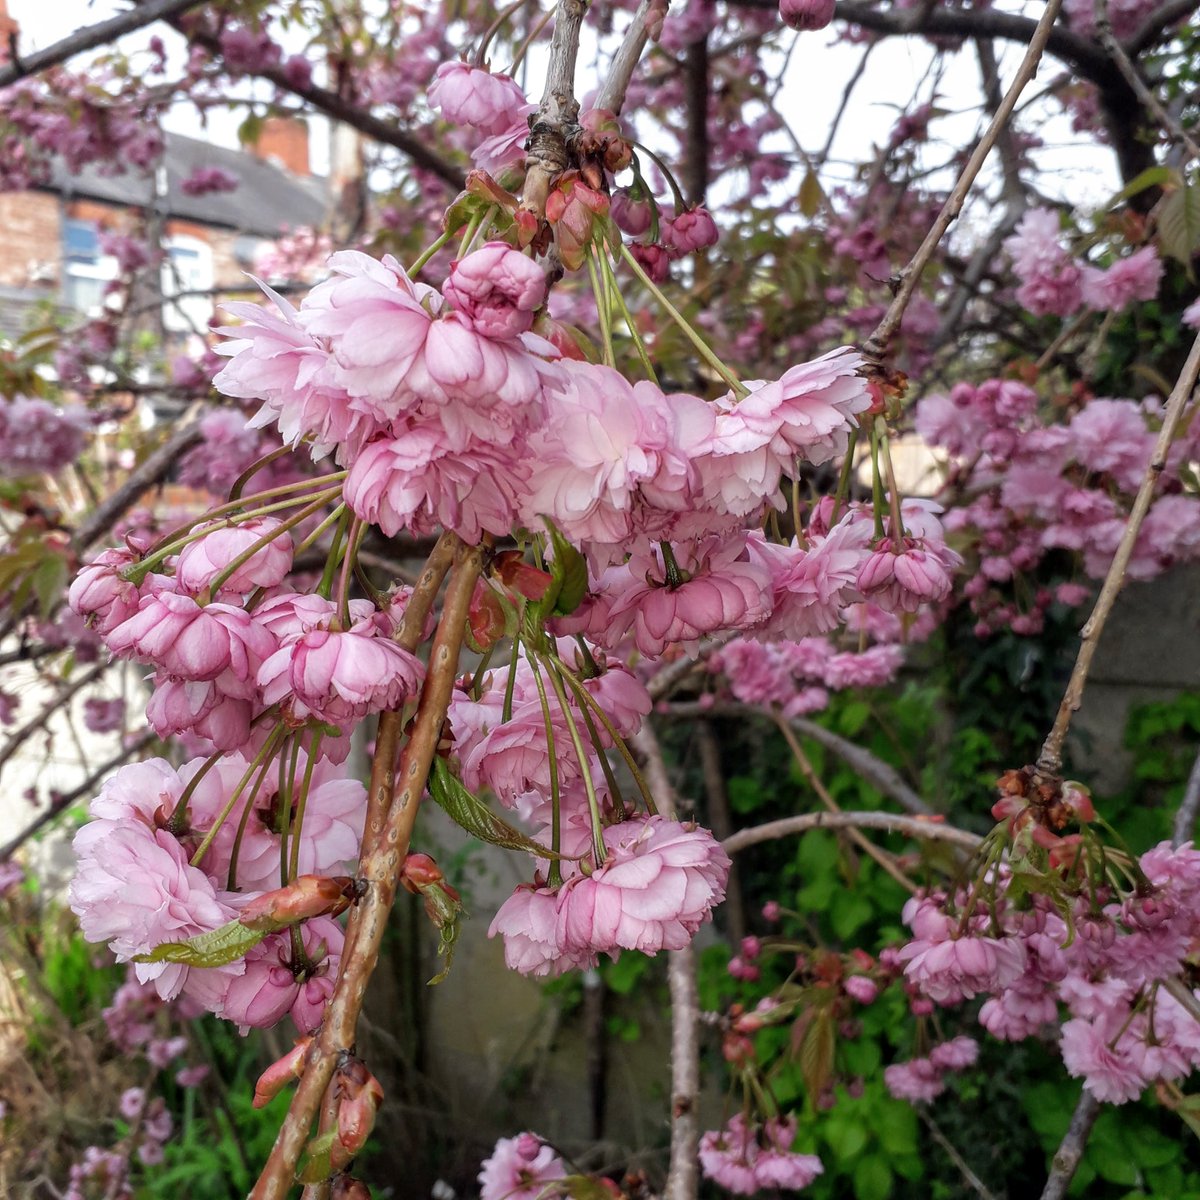 My cherry tree is out again! It's always a week or two after some of the others, so already the streets and pavements are lined with pink petals. It gives me such pleasure every year - even when it hails!